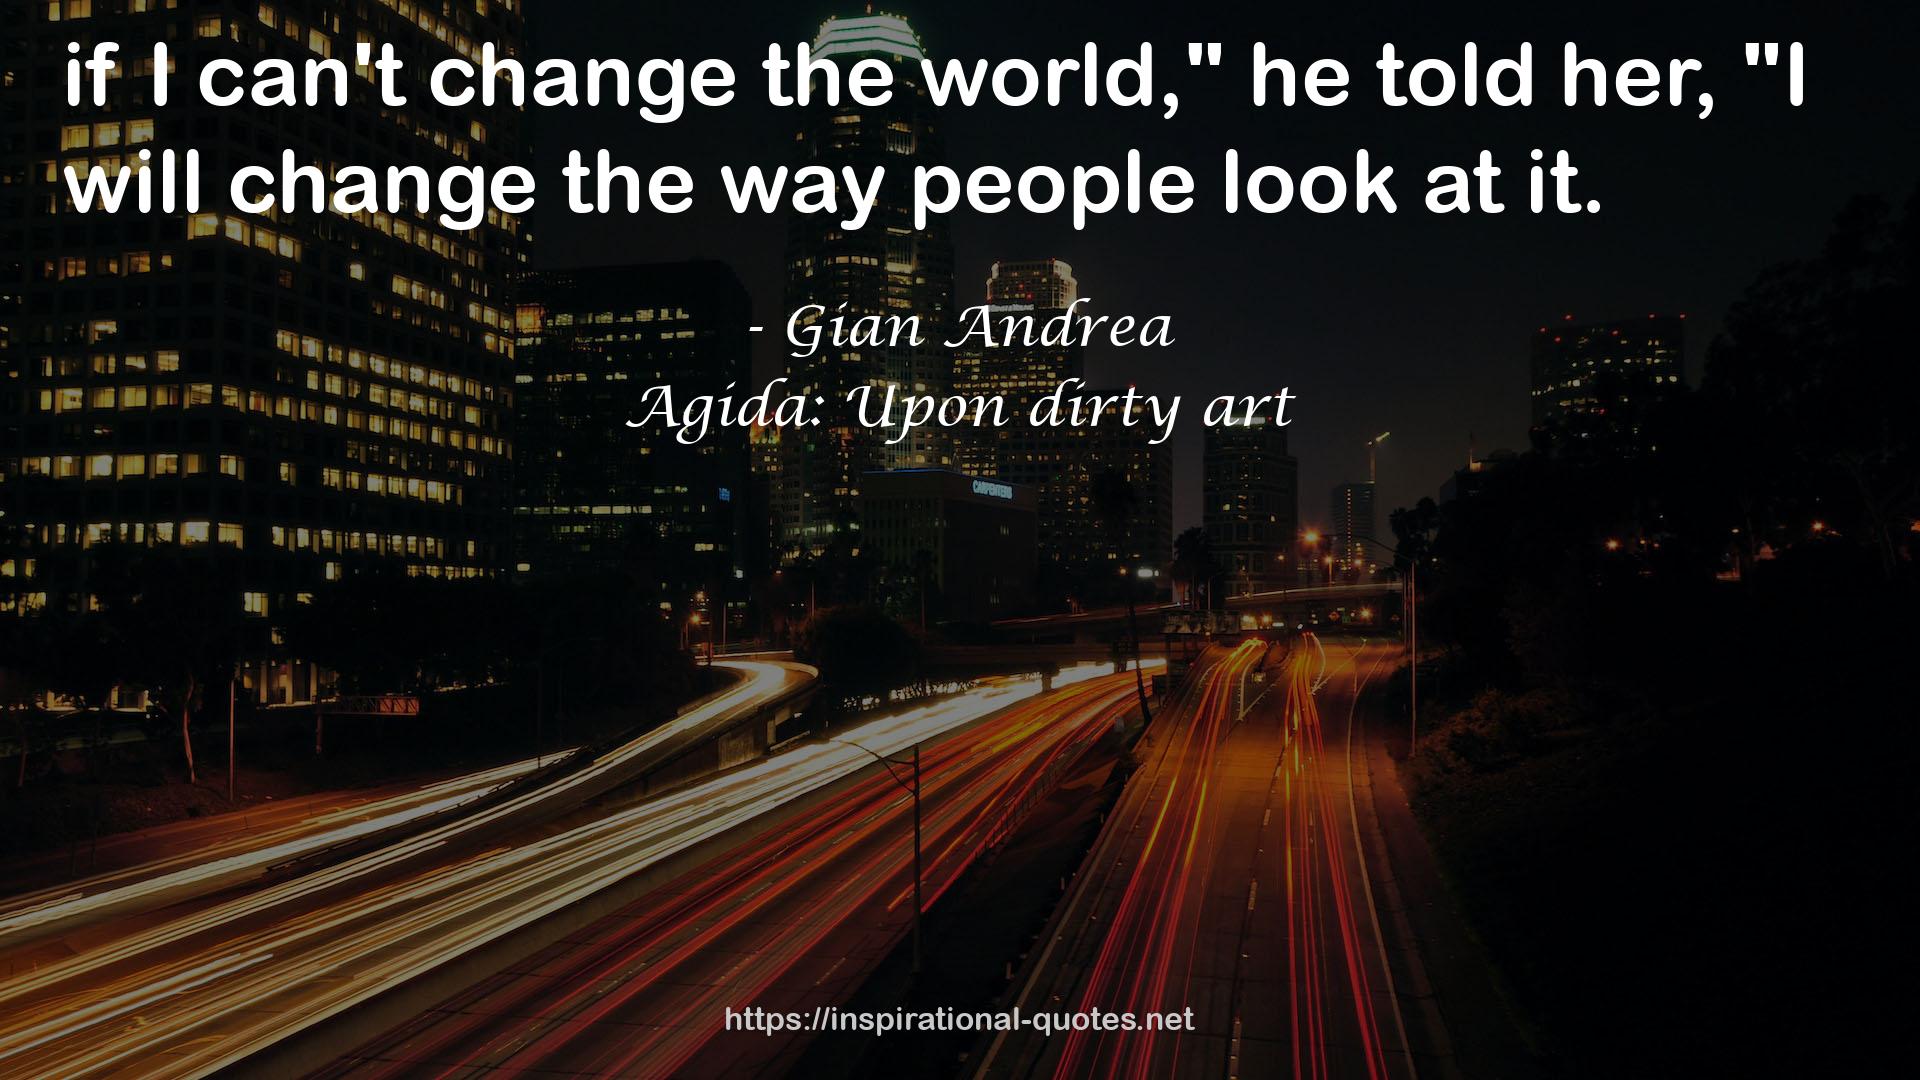 Agida: Upon dirty art QUOTES